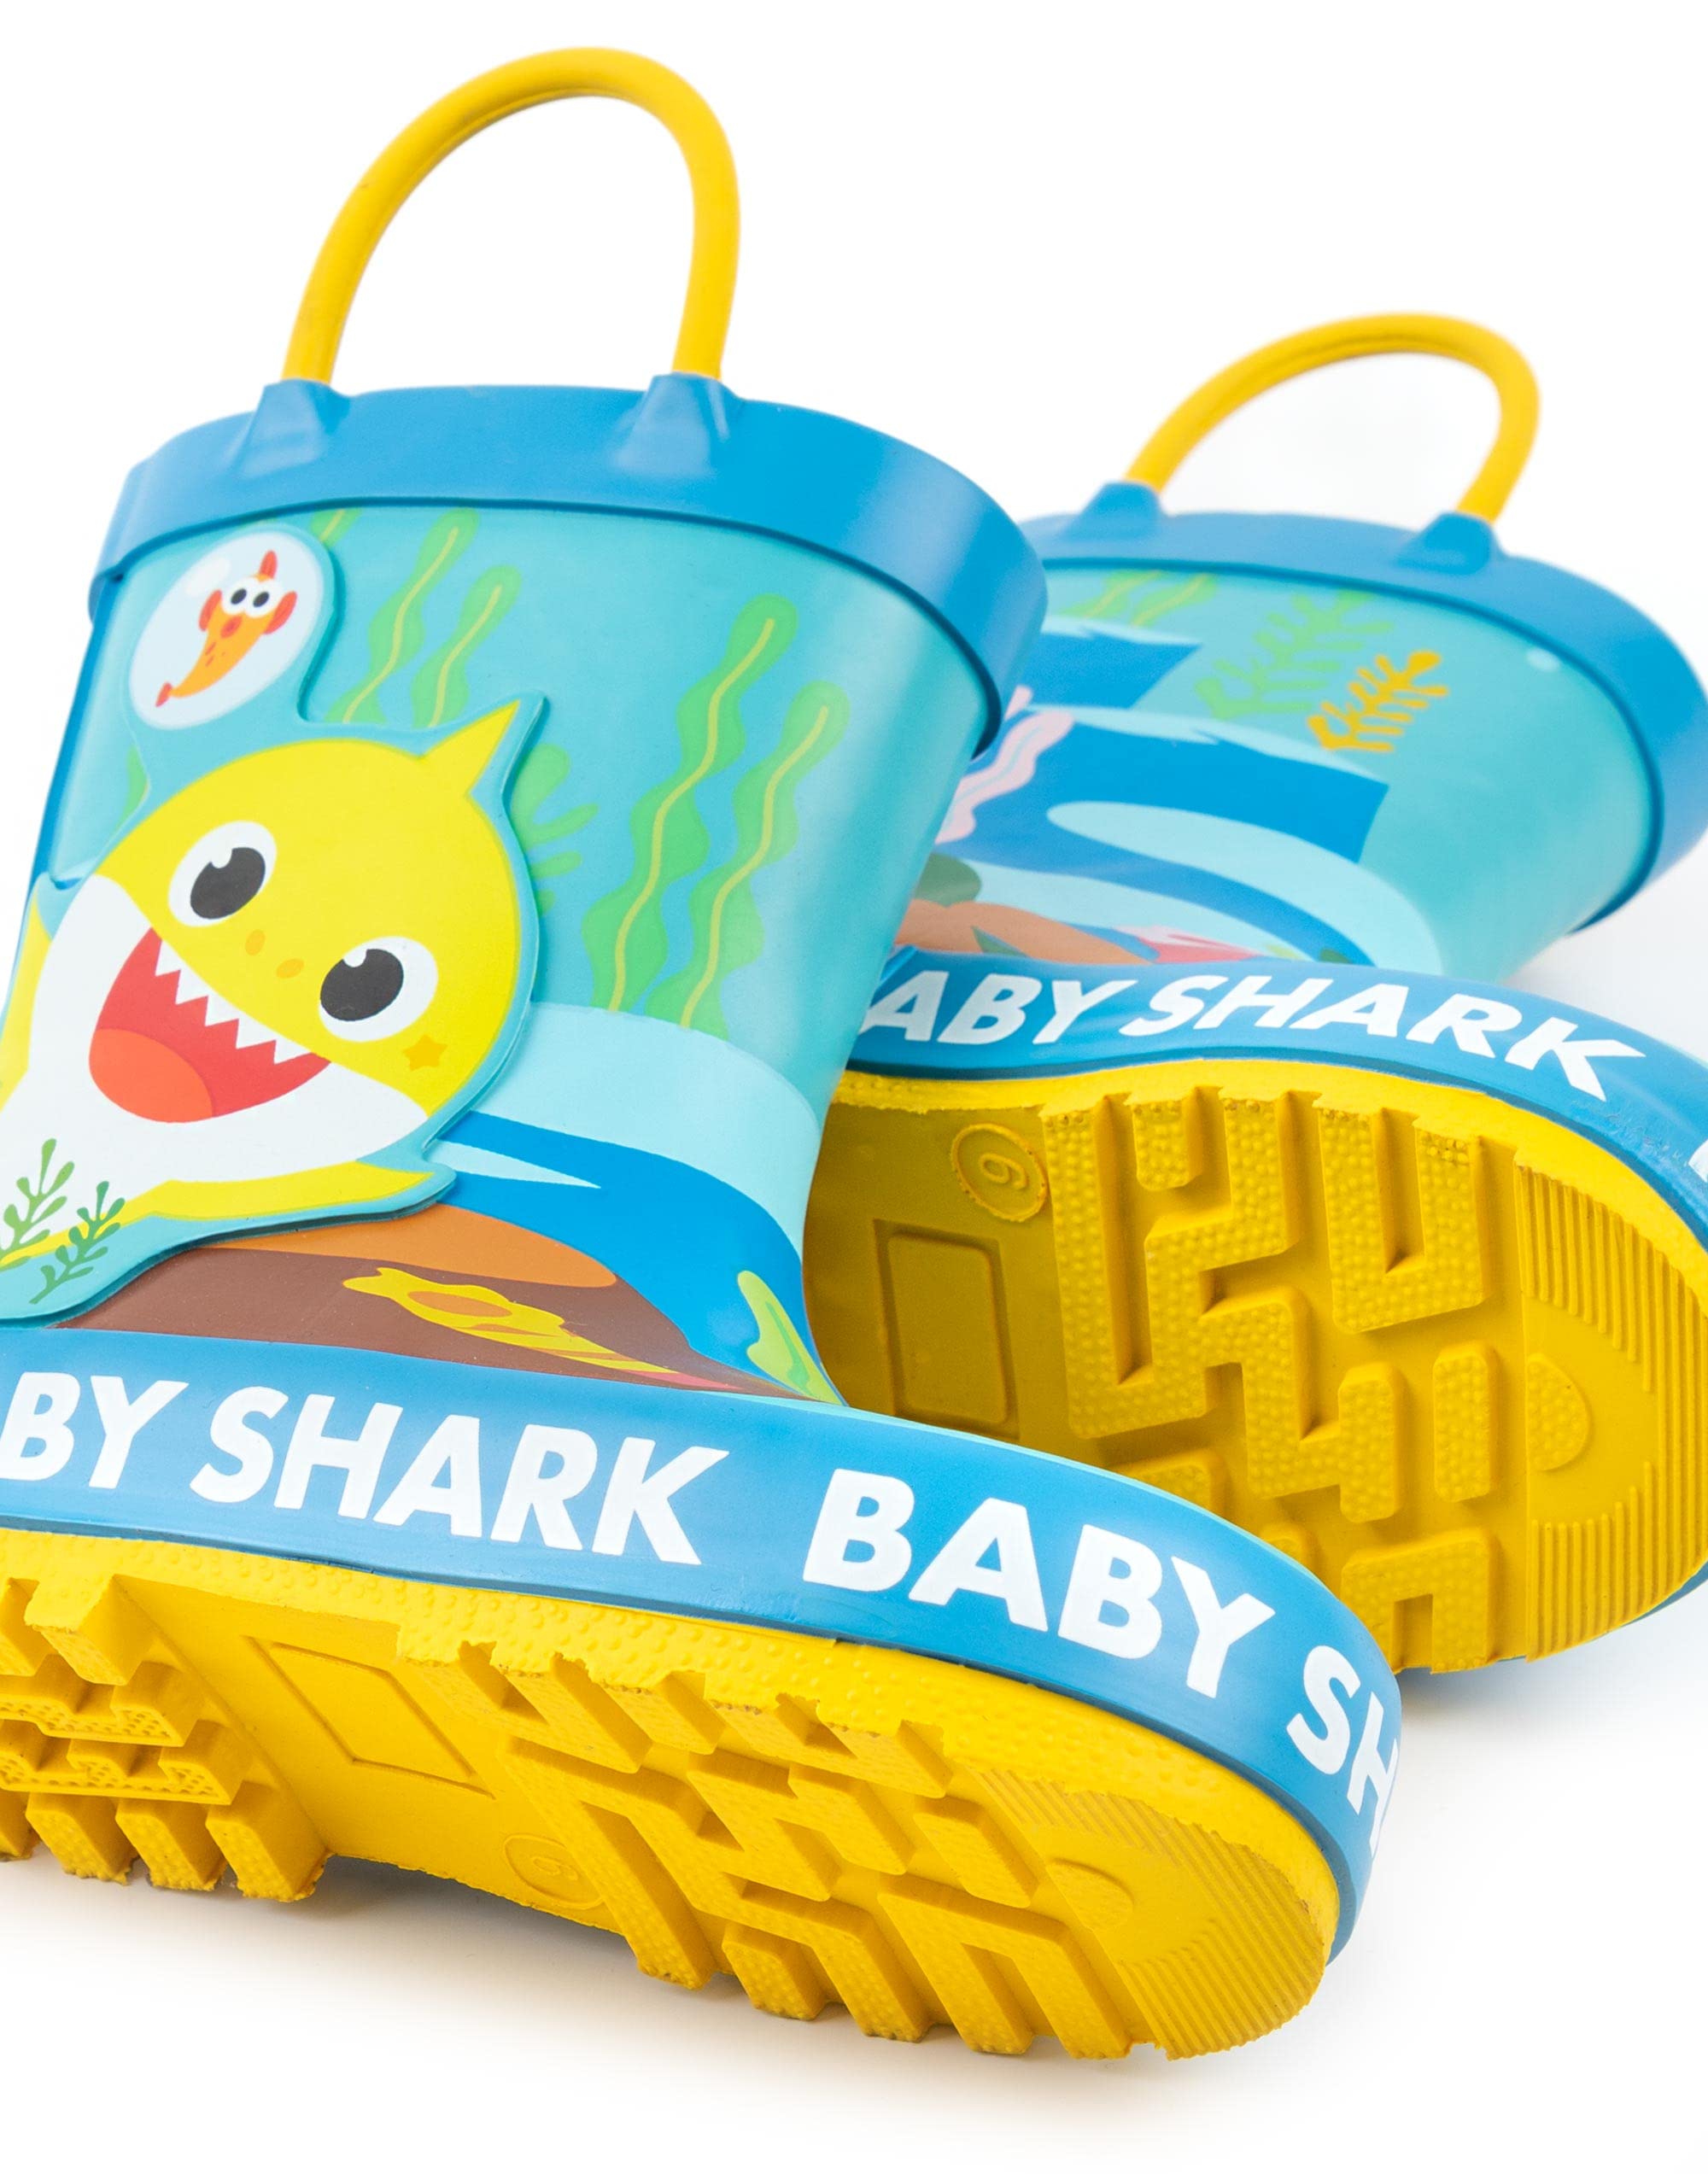 Baby Shark Wellies Kids Toddlers | Girls Boys Animated Singing Shark Family Song Rain Wellington Boots With 3D Fin | Water Resistant Walking Shoes